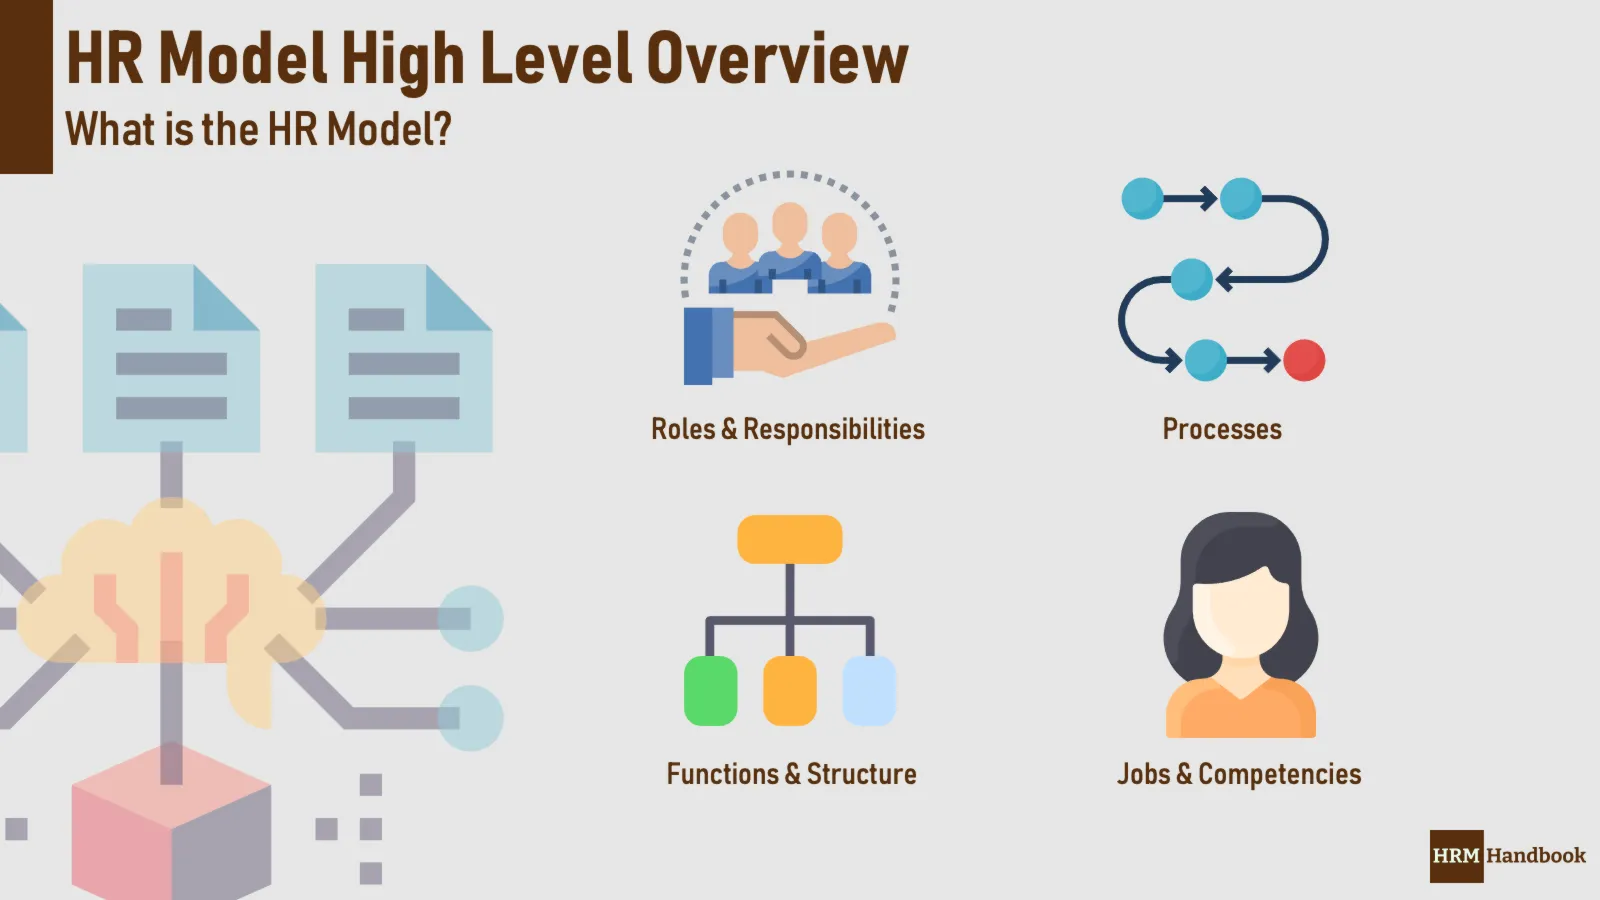 HR Model Overview and how it drives other elements in Human Resources like Structure, Jobs and Responsibilities